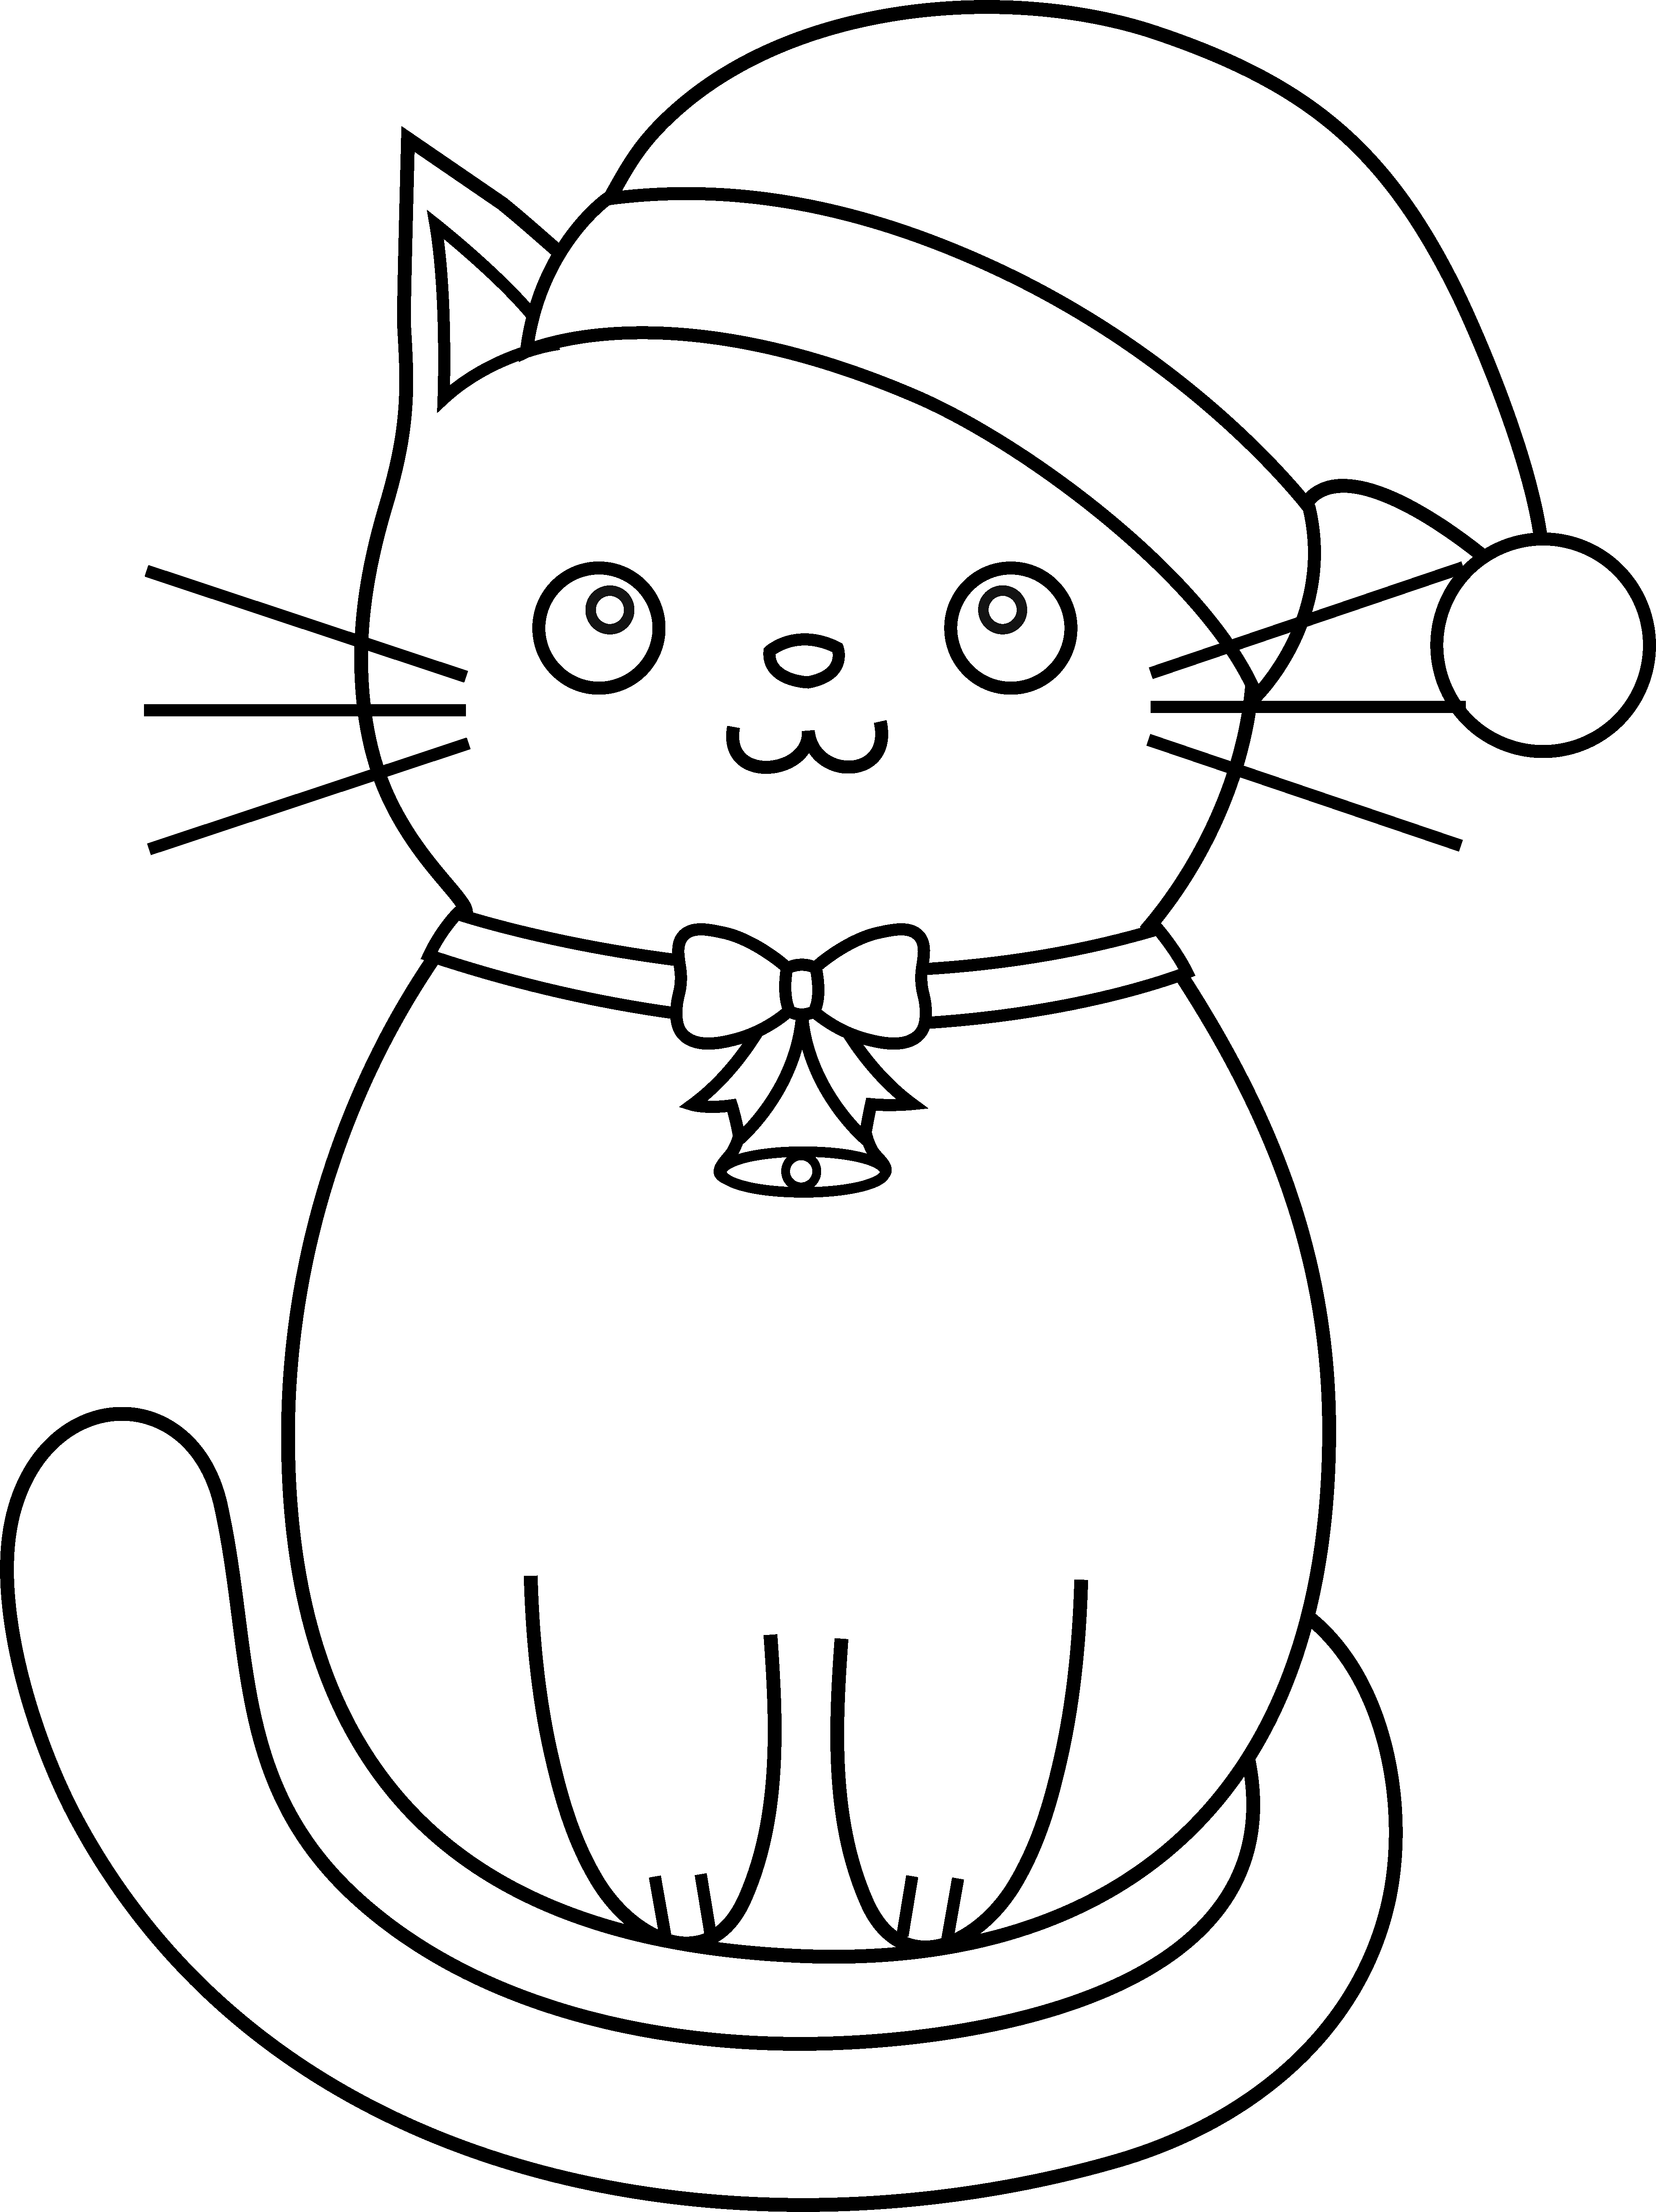 Kitten Coloring Pages Best Coloring Pages For Kids Coloring Wallpapers Download Free Images Wallpaper [coloring436.blogspot.com]